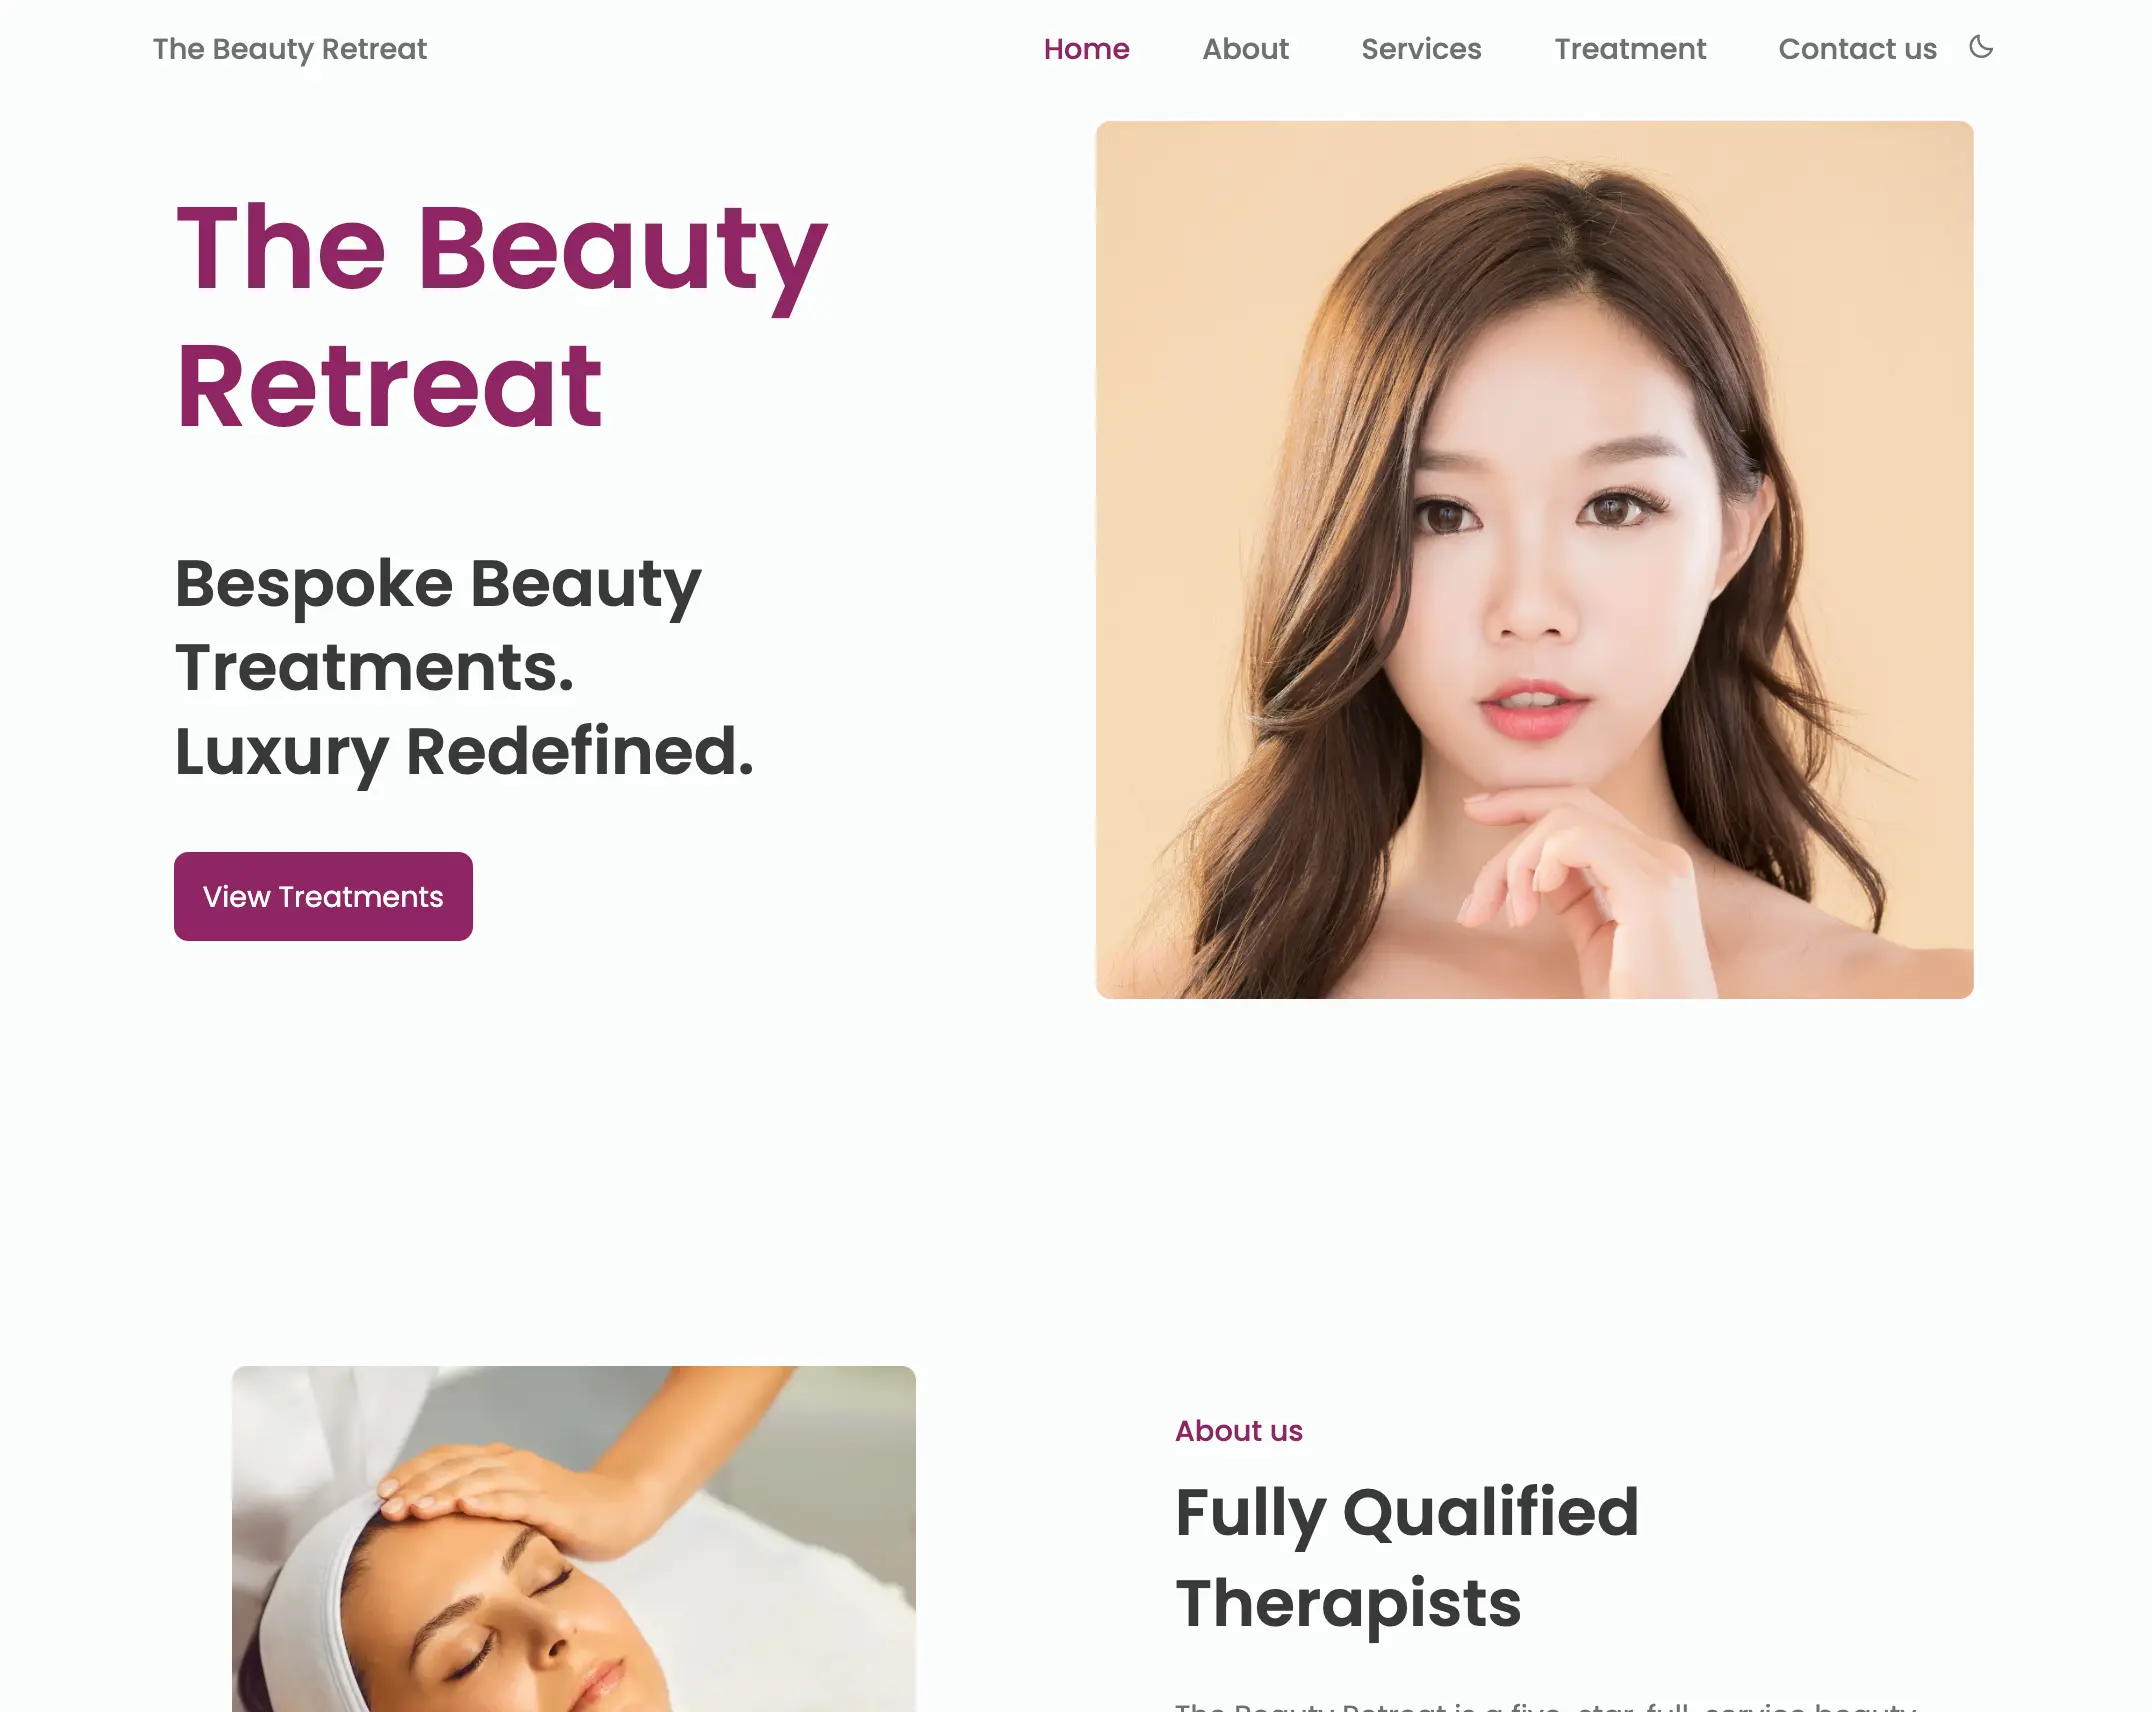 Home page of The Beauty Retreat